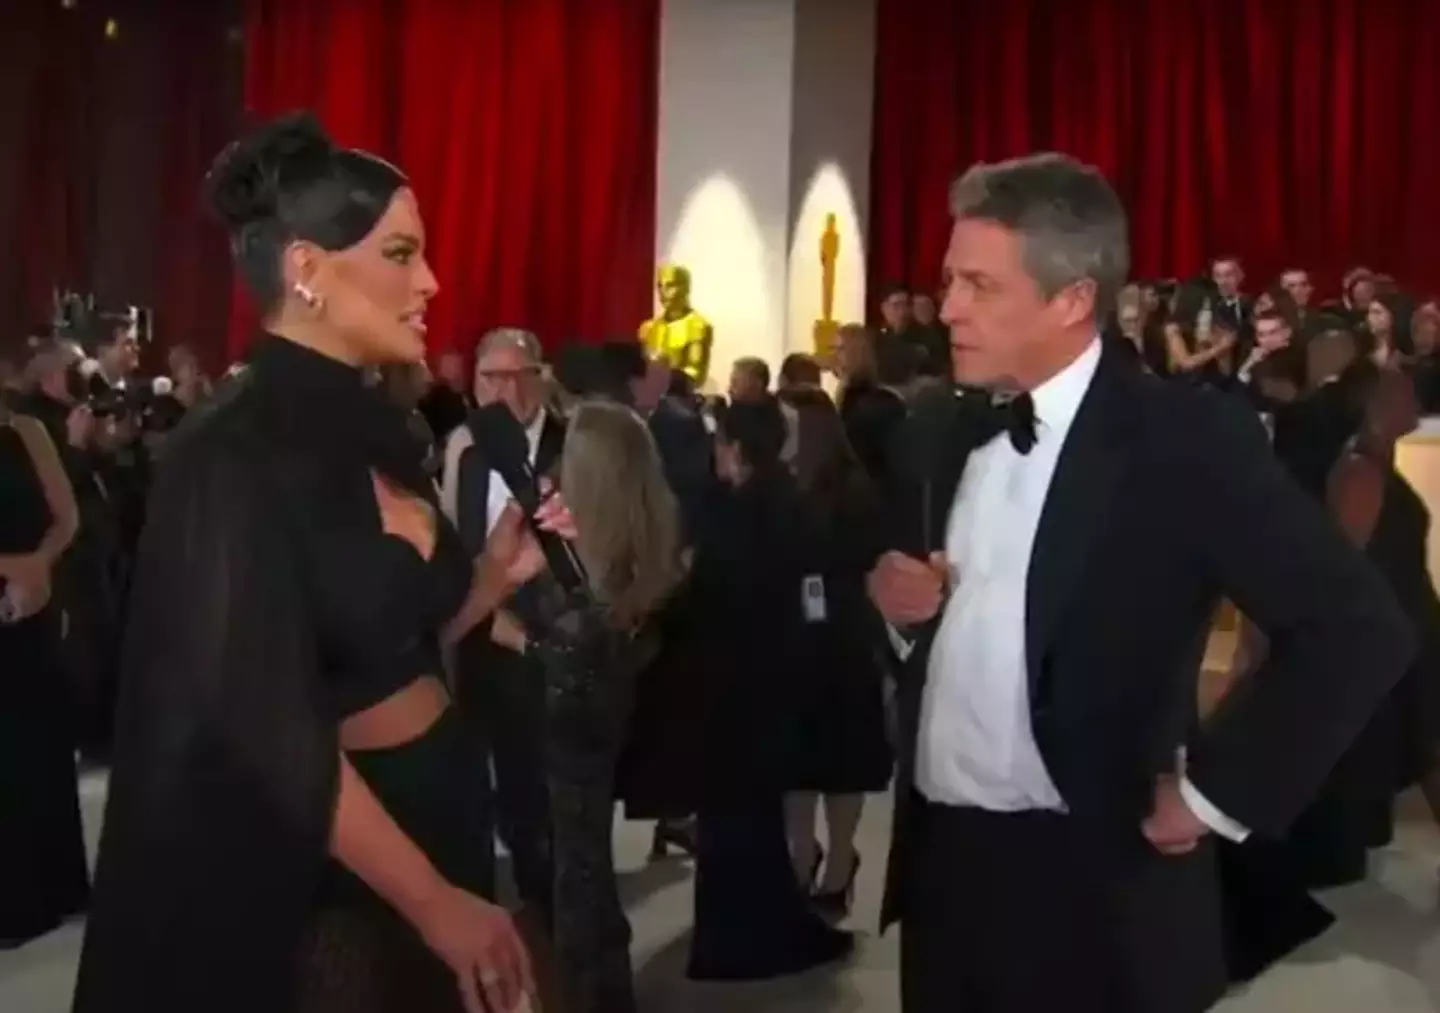 The model - who was presenting on the champagne carpet at this year's 95th Academy Awards - got some airtime with the Love Actually star.